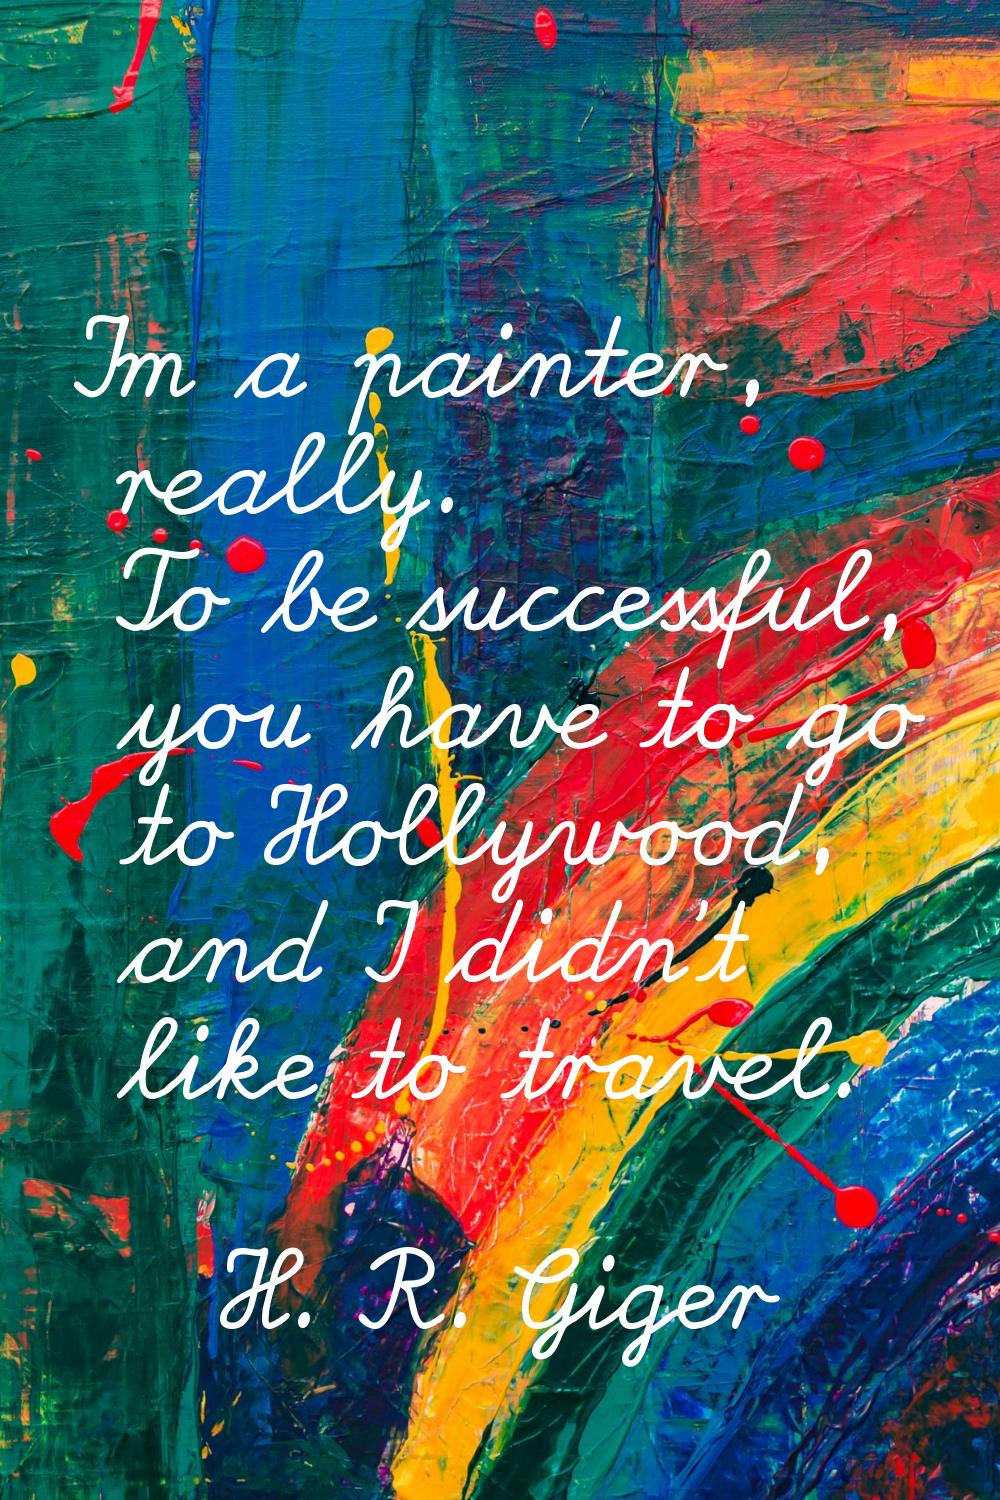 I'm a painter, really. To be successful, you have to go to Hollywood, and I didn't like to travel.